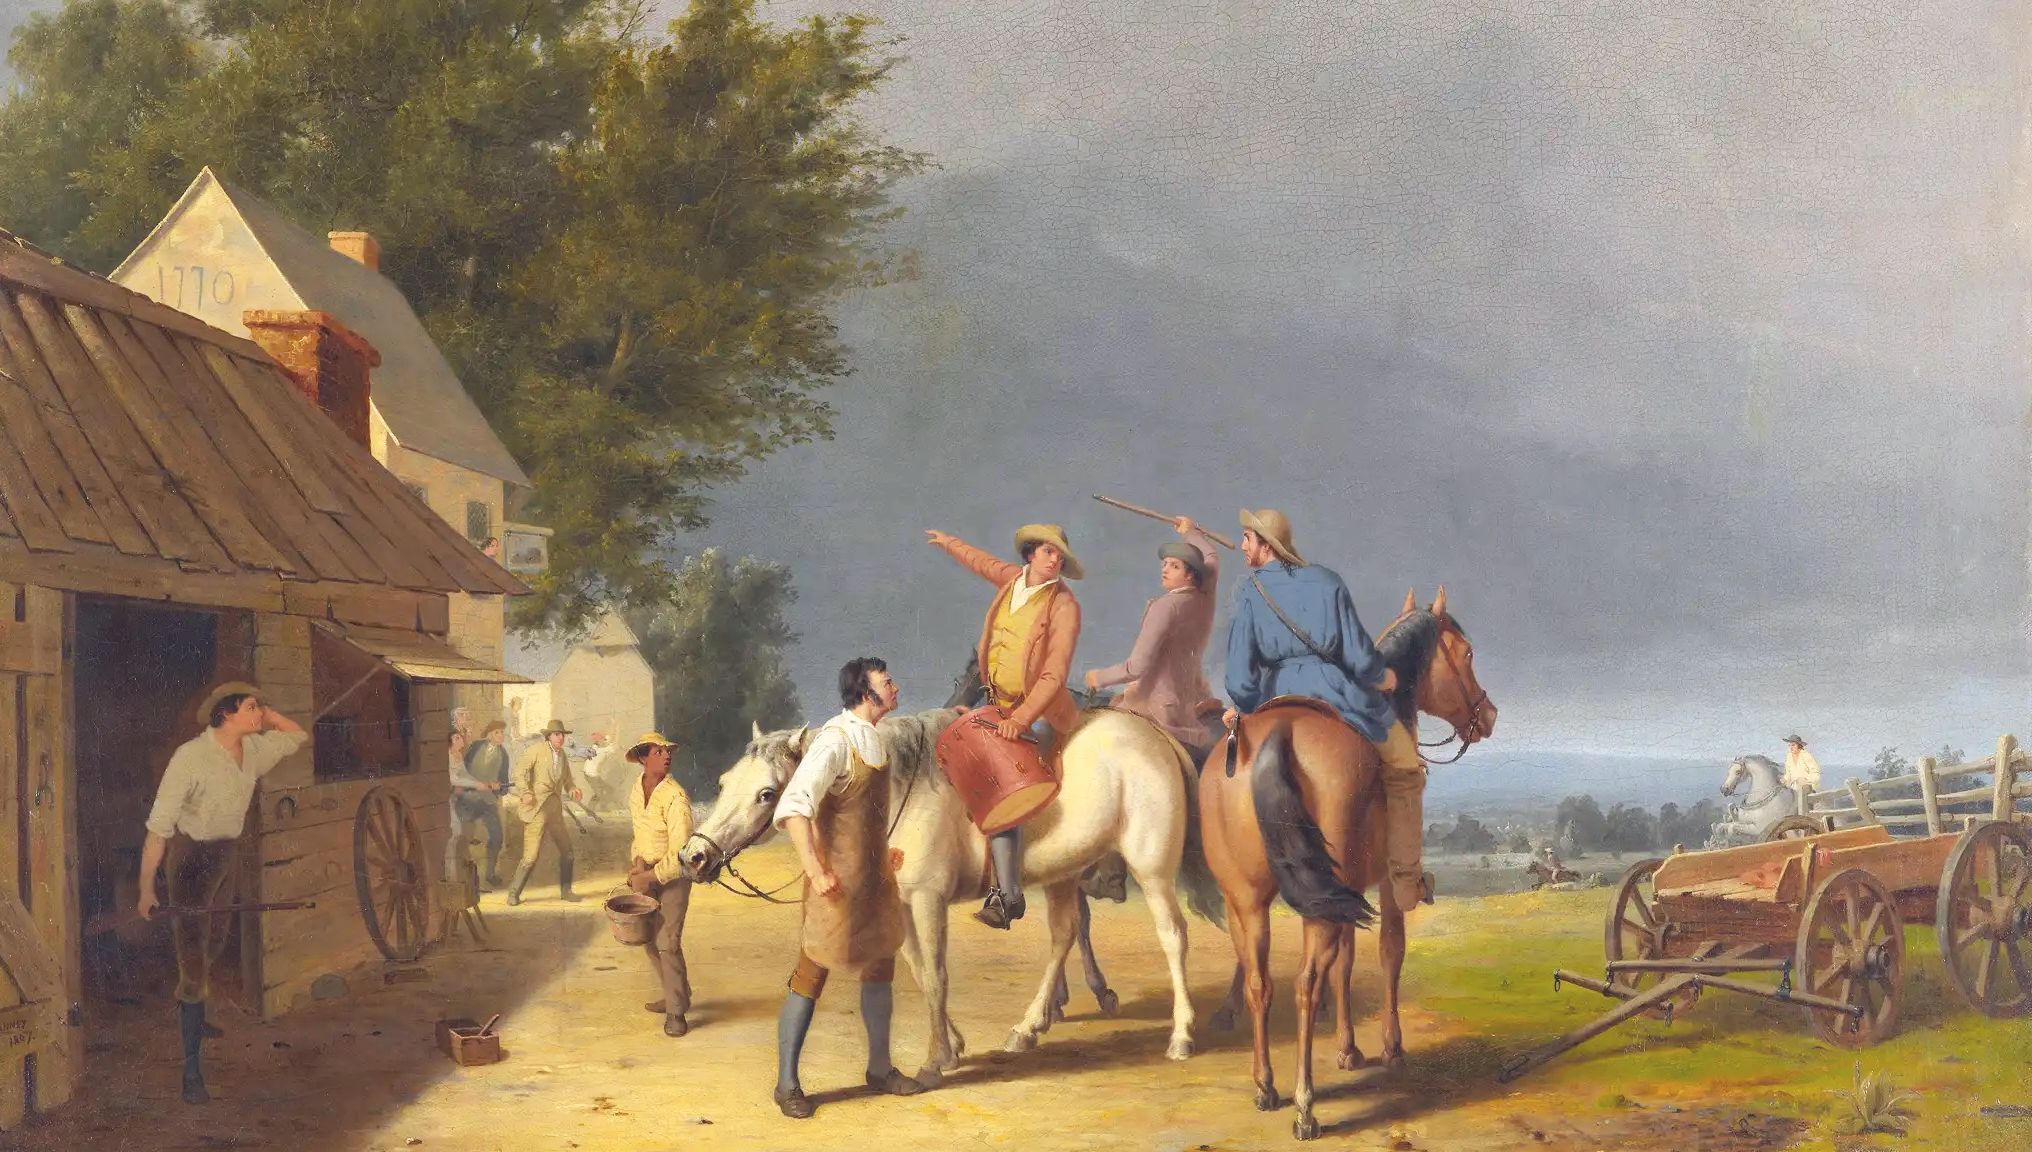 When news spread of the shots fired at Lexington, nearly 4,000 farmers and other citizens rushed to the battle to fight for the patriot cause. North Carolina Museum of Art